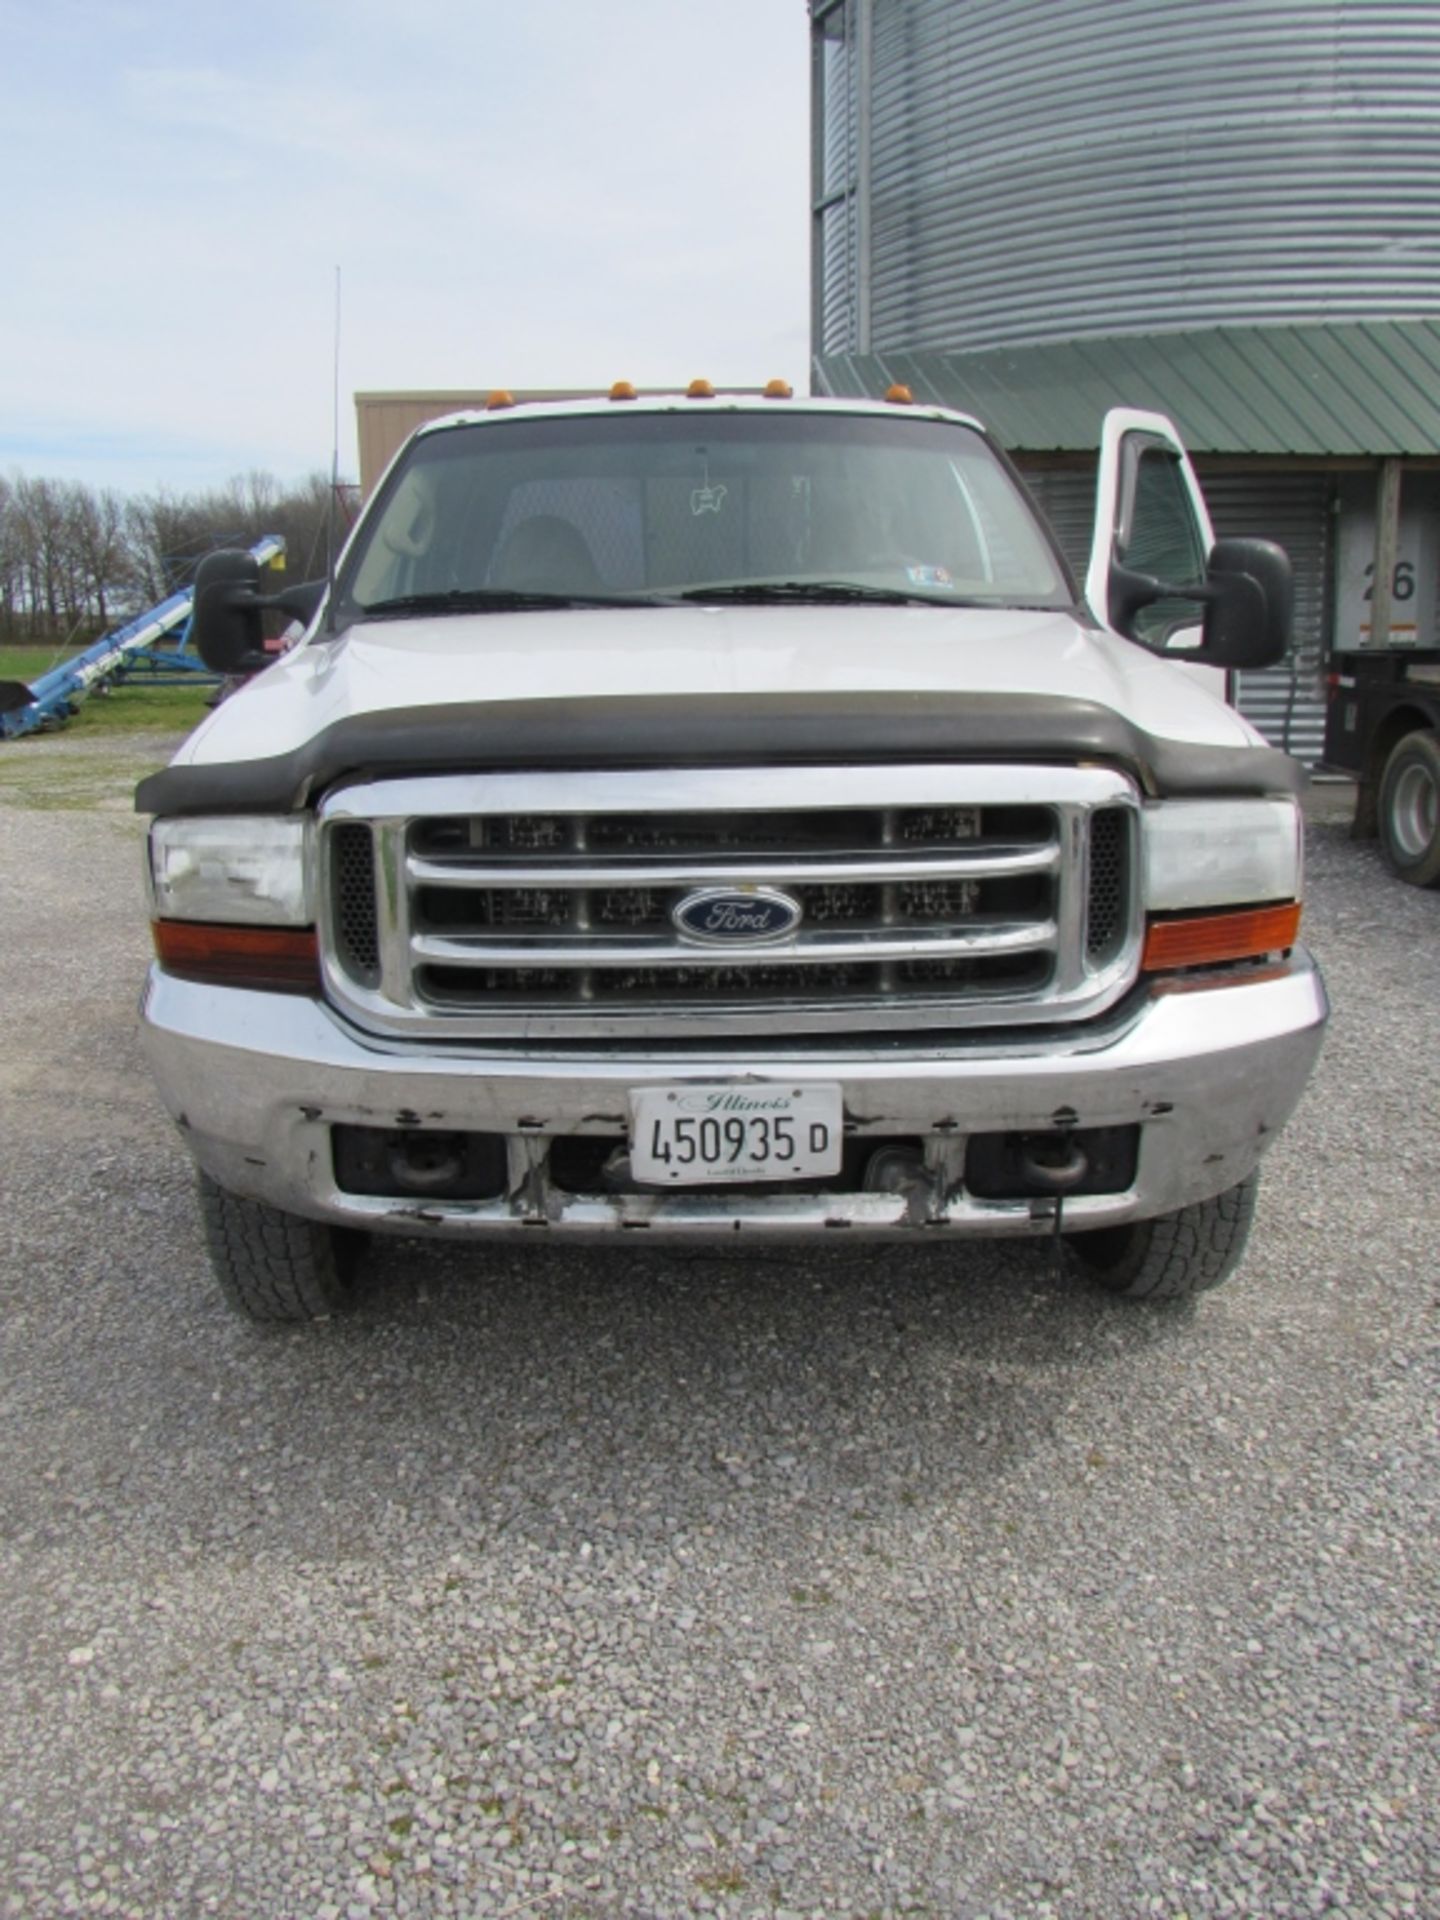 2001 Ford F350 Lariat Flatbed 4wd 7.3 L Powerstroke Diesel Engine - Image 10 of 21